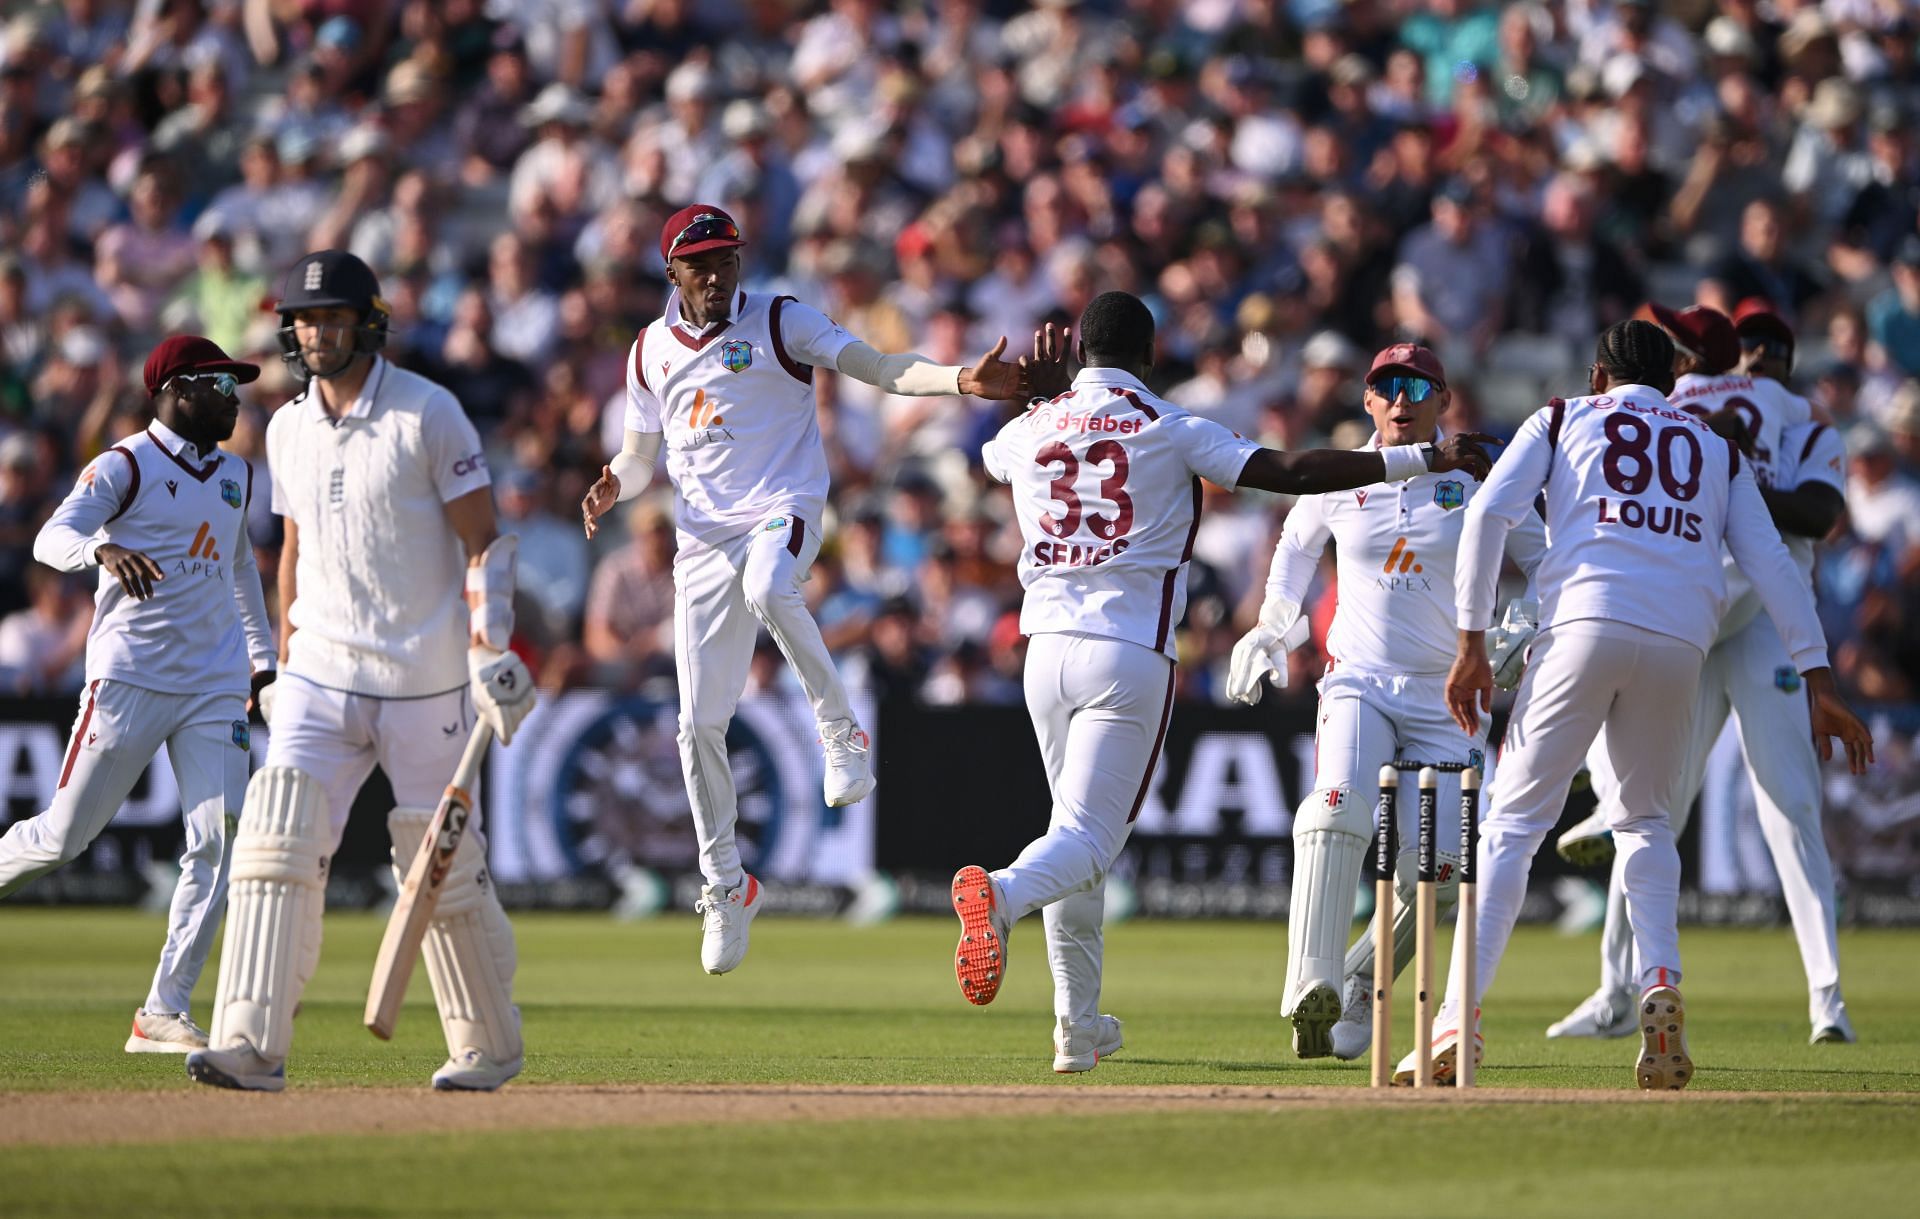 [Watch] West Indies take 3 early wickets to dent England's start, end Day 1 on a high in 3rd Test